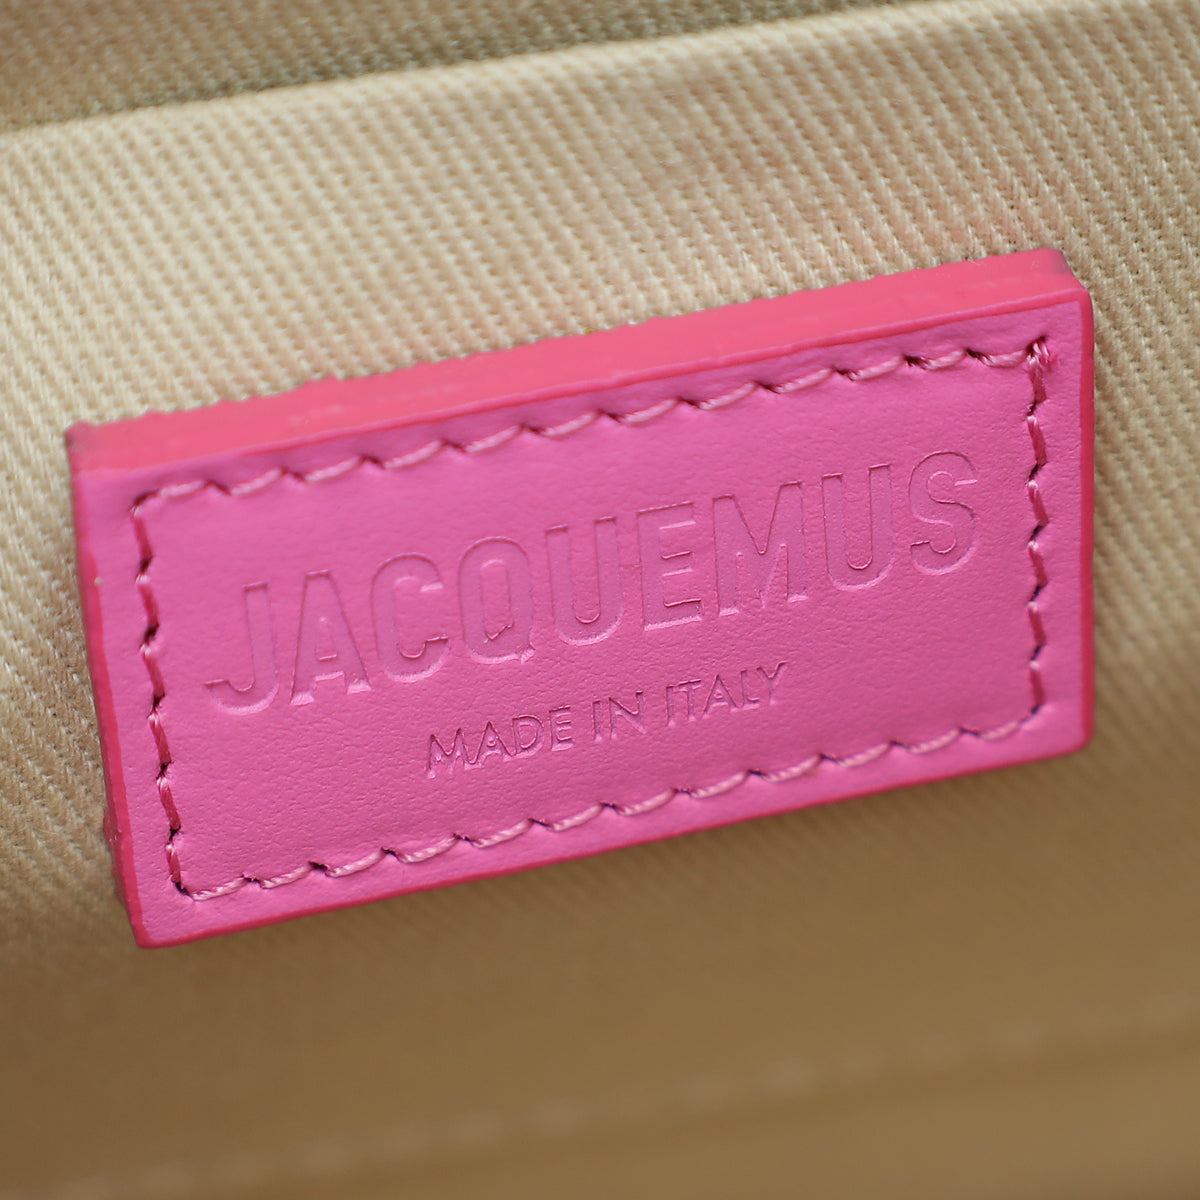 Jacquemus Neon Pink Le Grand Chiquito Top-Handle Large Bag